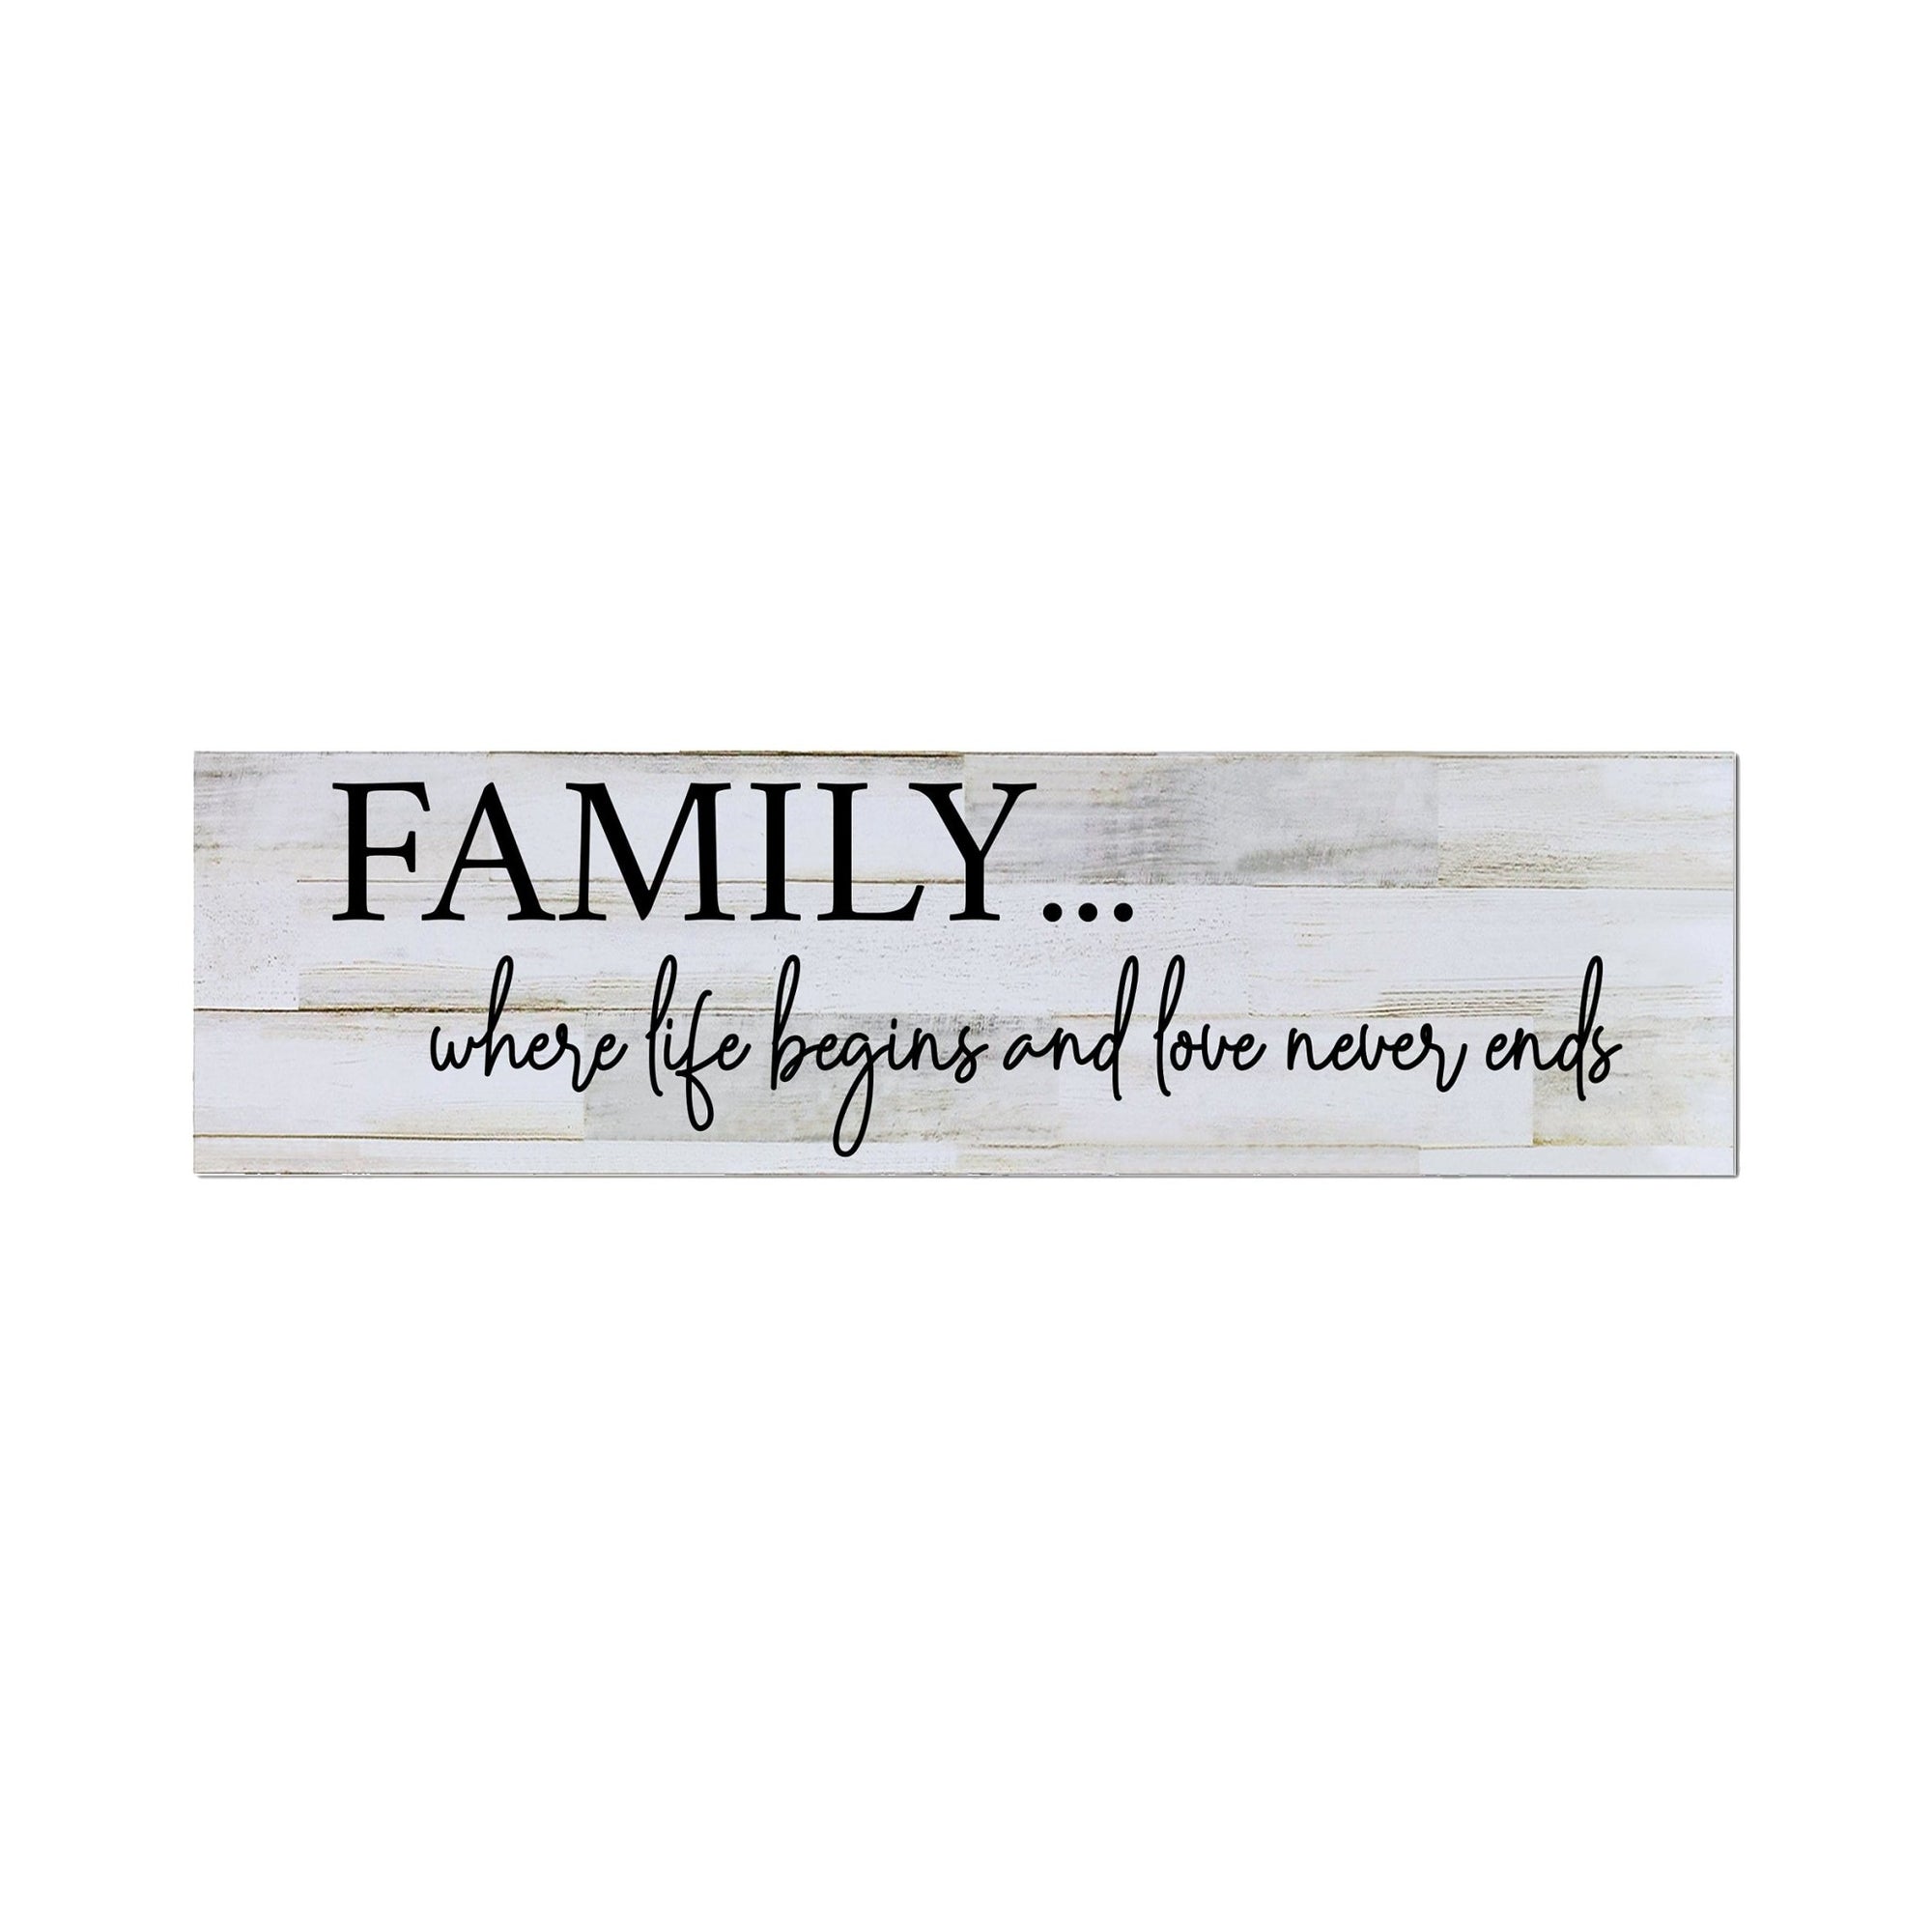 Inspirational Modern Wooden Wall Hanging Family Plaque 22.5x6 - Where Life Begins - LifeSong Milestones